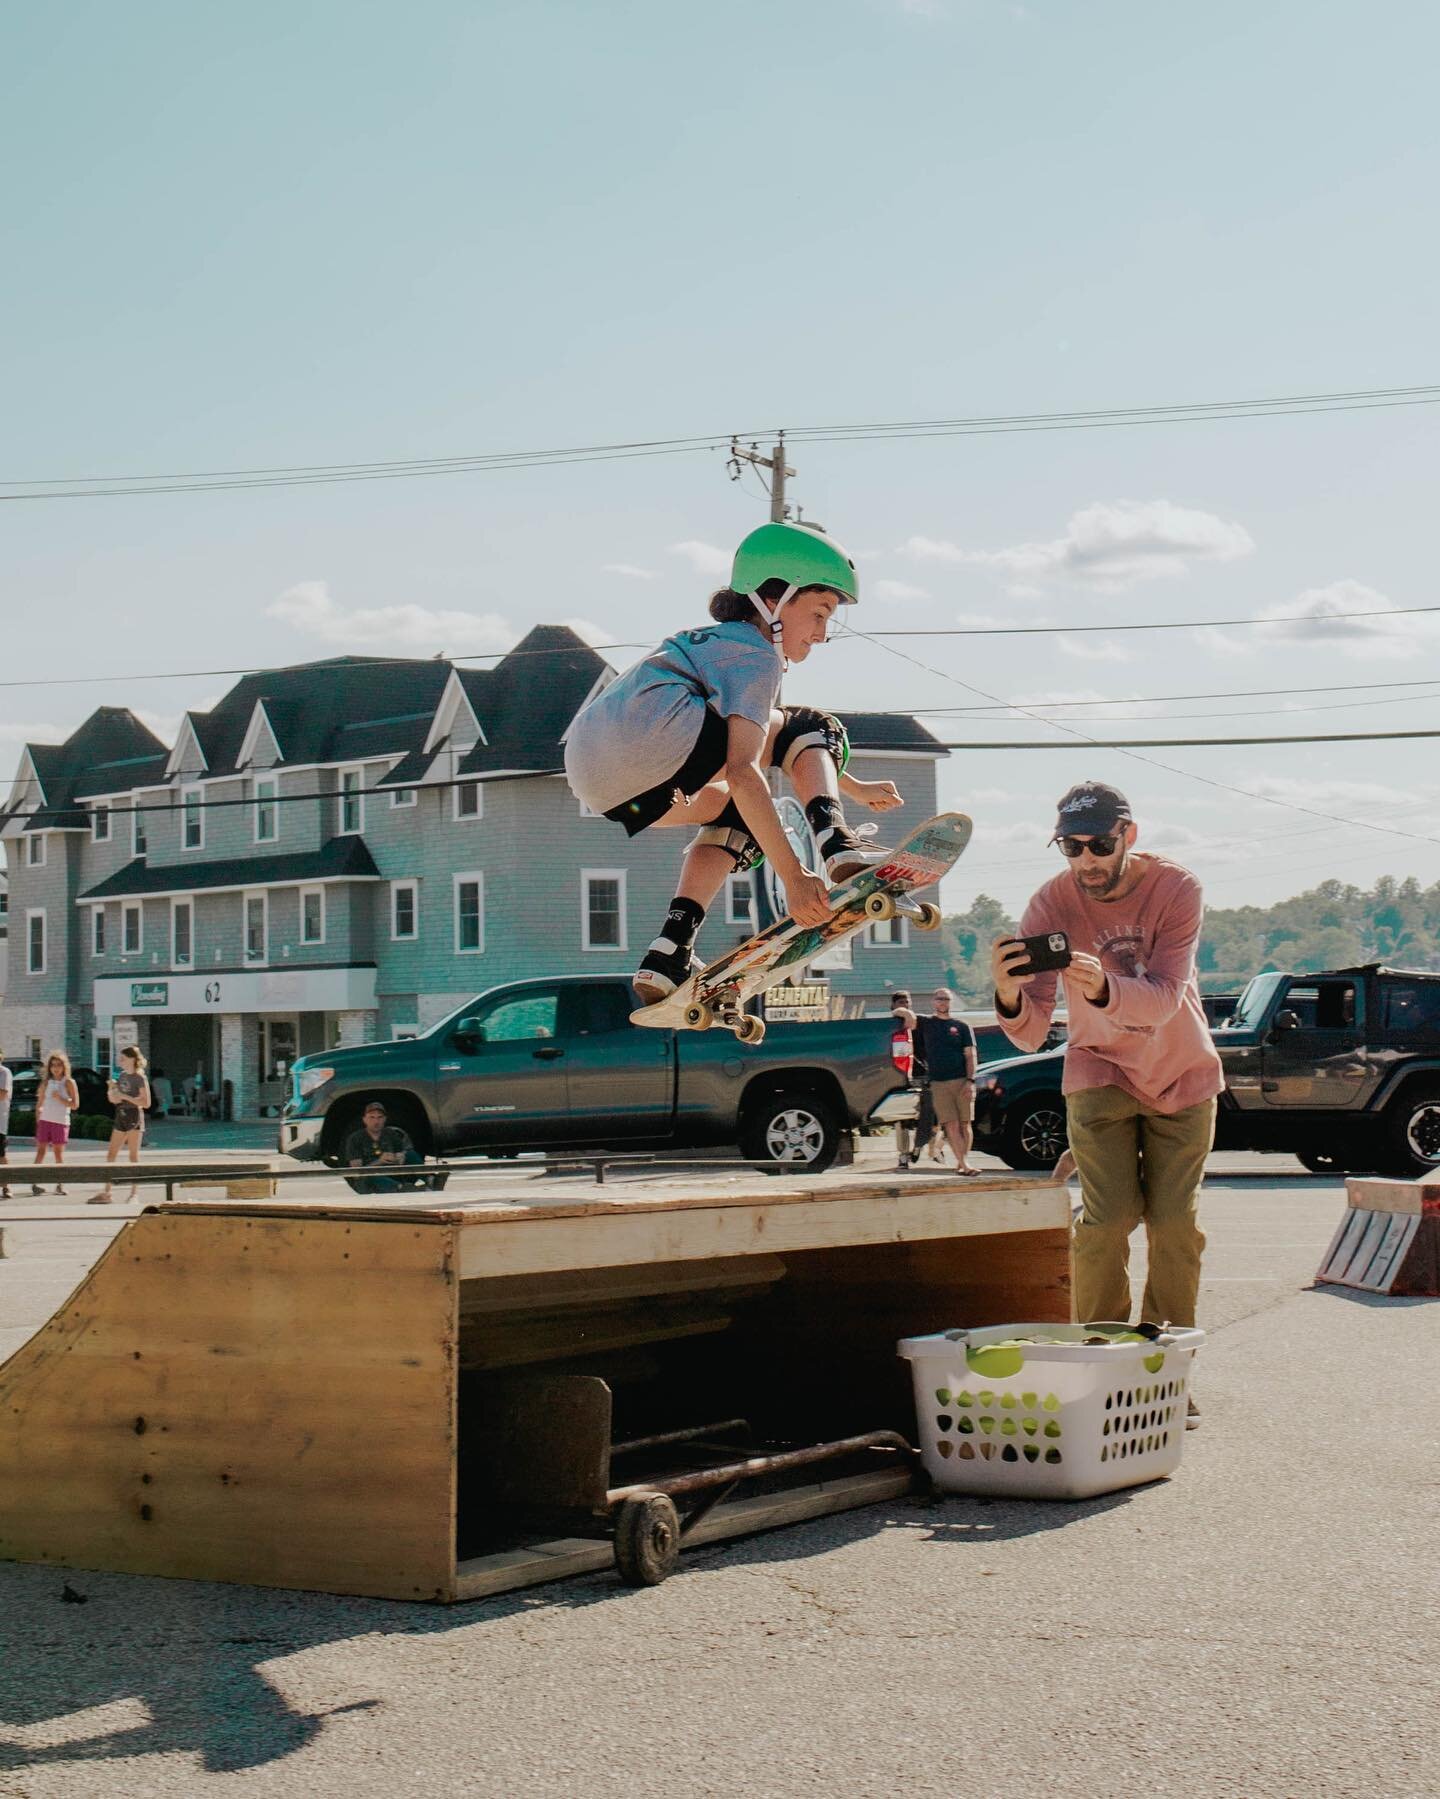 Thanks to everyone who came out to our first skate jam!  Big shout out to @donnybarley and @darealdjnook for keeping the crowd stoked and @singlefincoffeeco @rejectsbeerco @gansettbeer for the refreshments!  We&rsquo;re looking forward to seeing ever